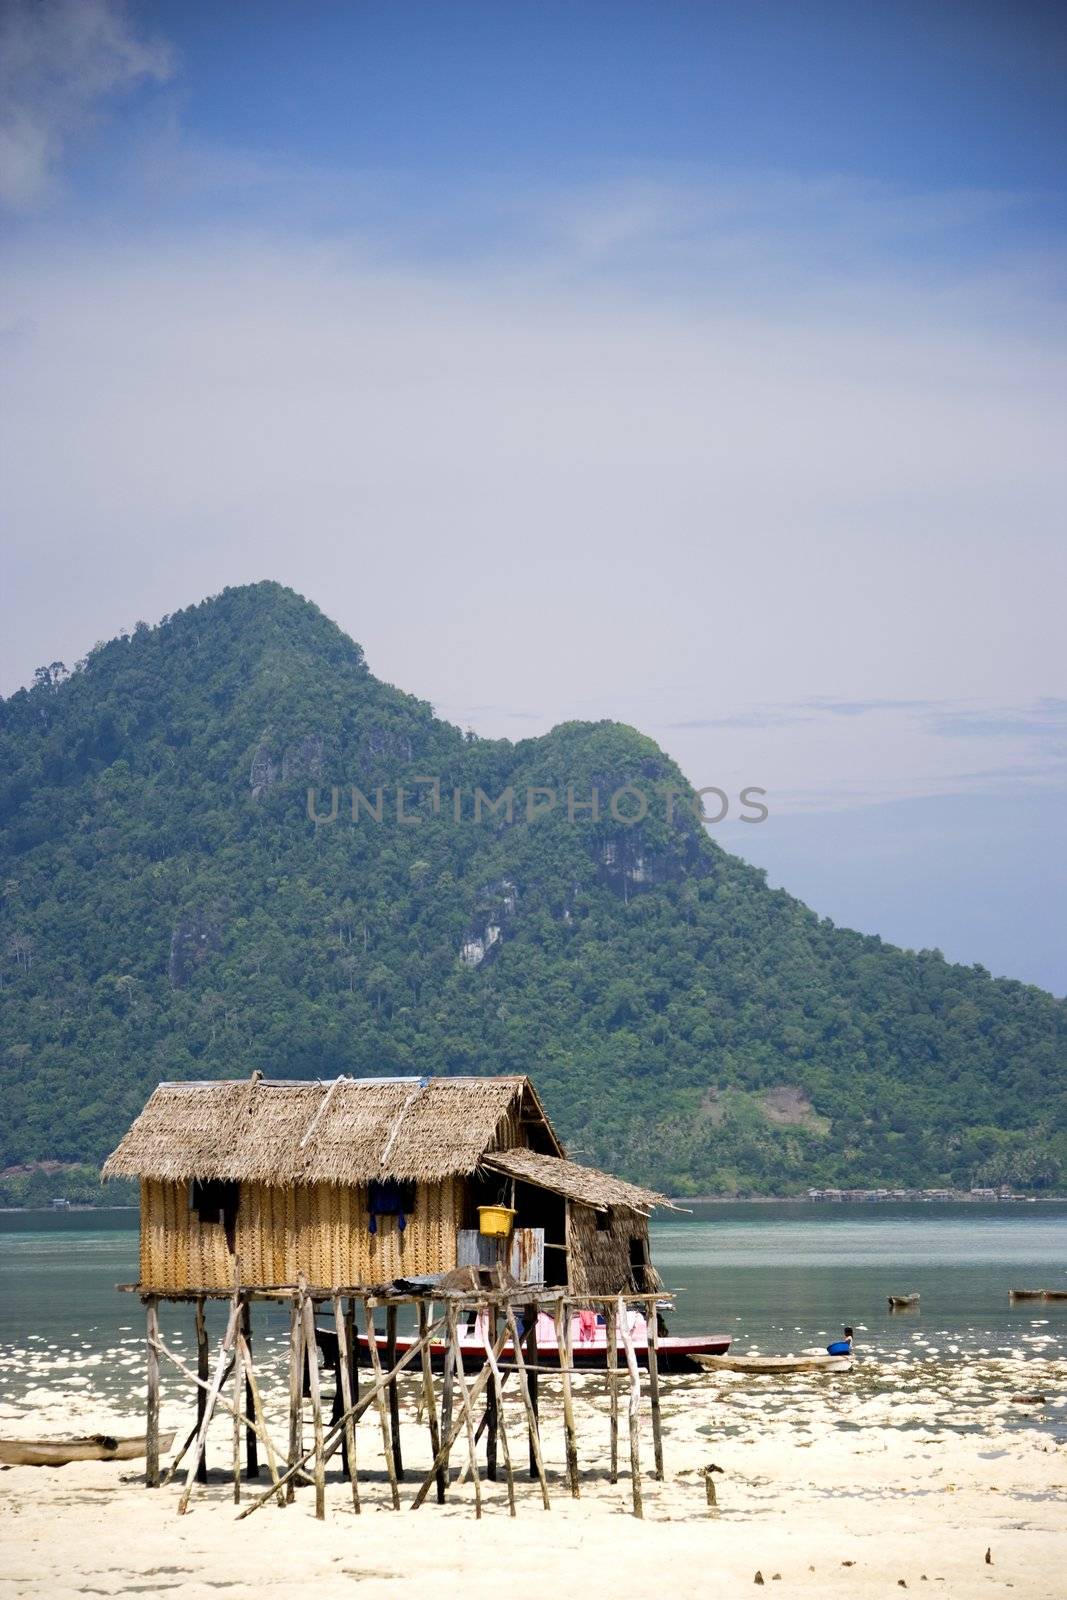 Image of a native hut on stilts on a remote island in Malaysia.